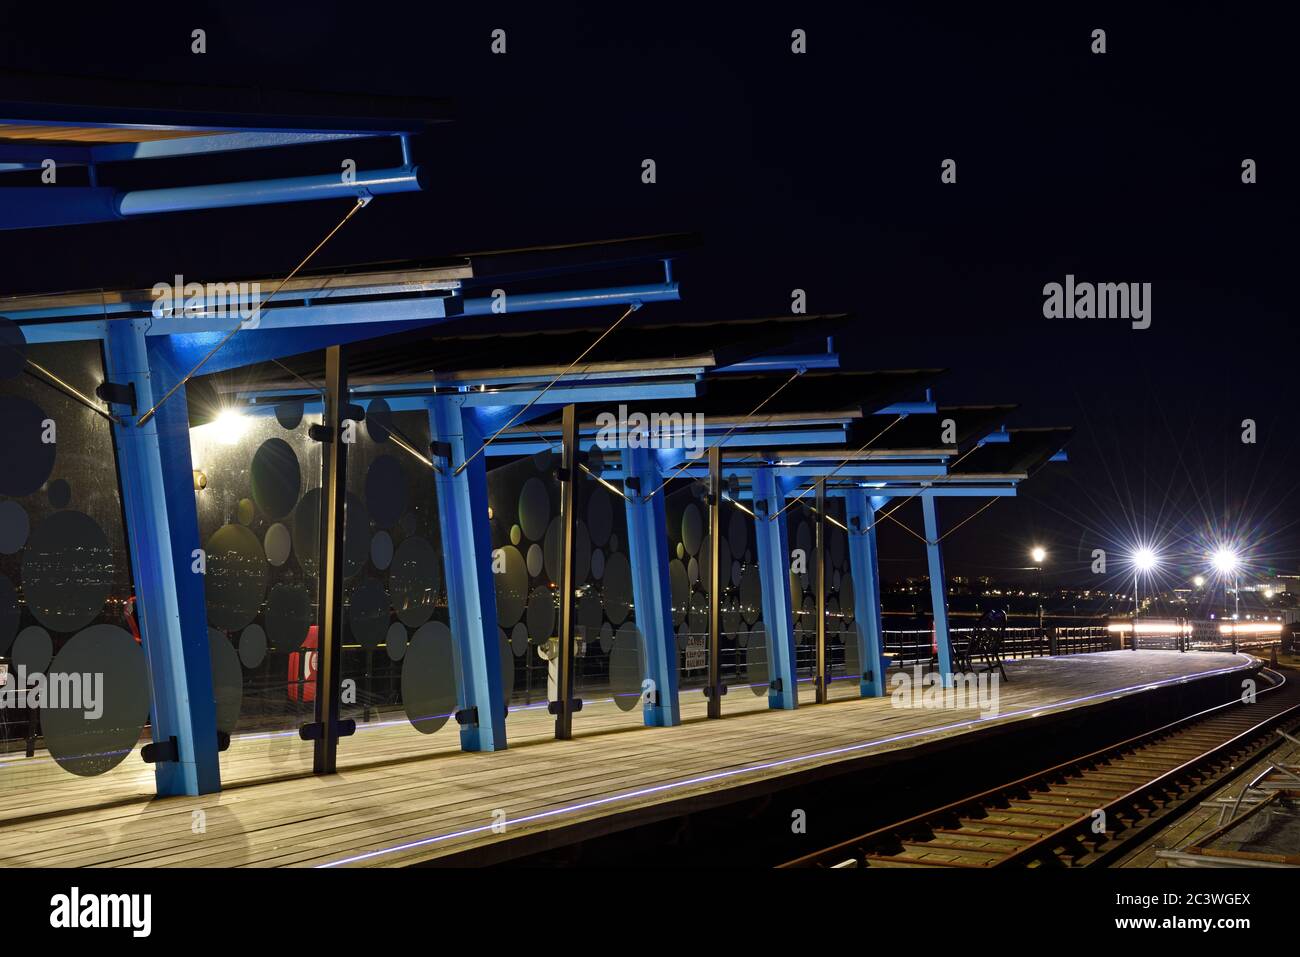 Southend Pier railway station at night. Stock Photo